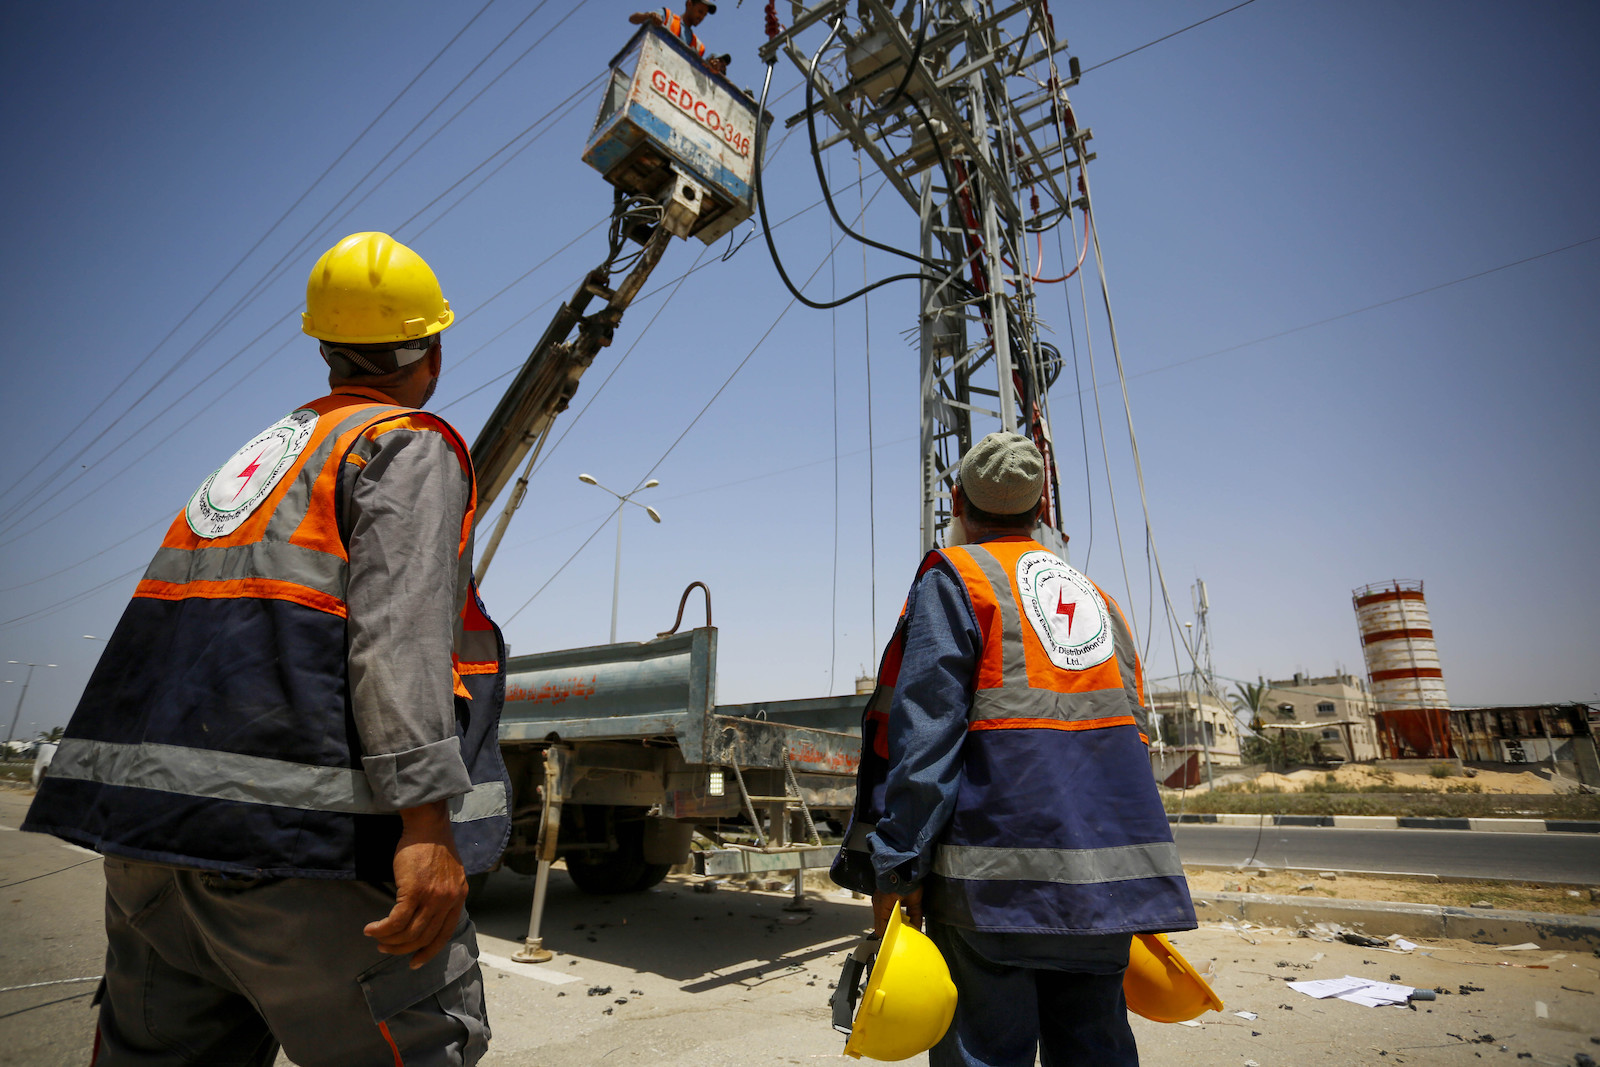 two people in construction hats and vest look at an electrical tower with construction equipment reaching up to it